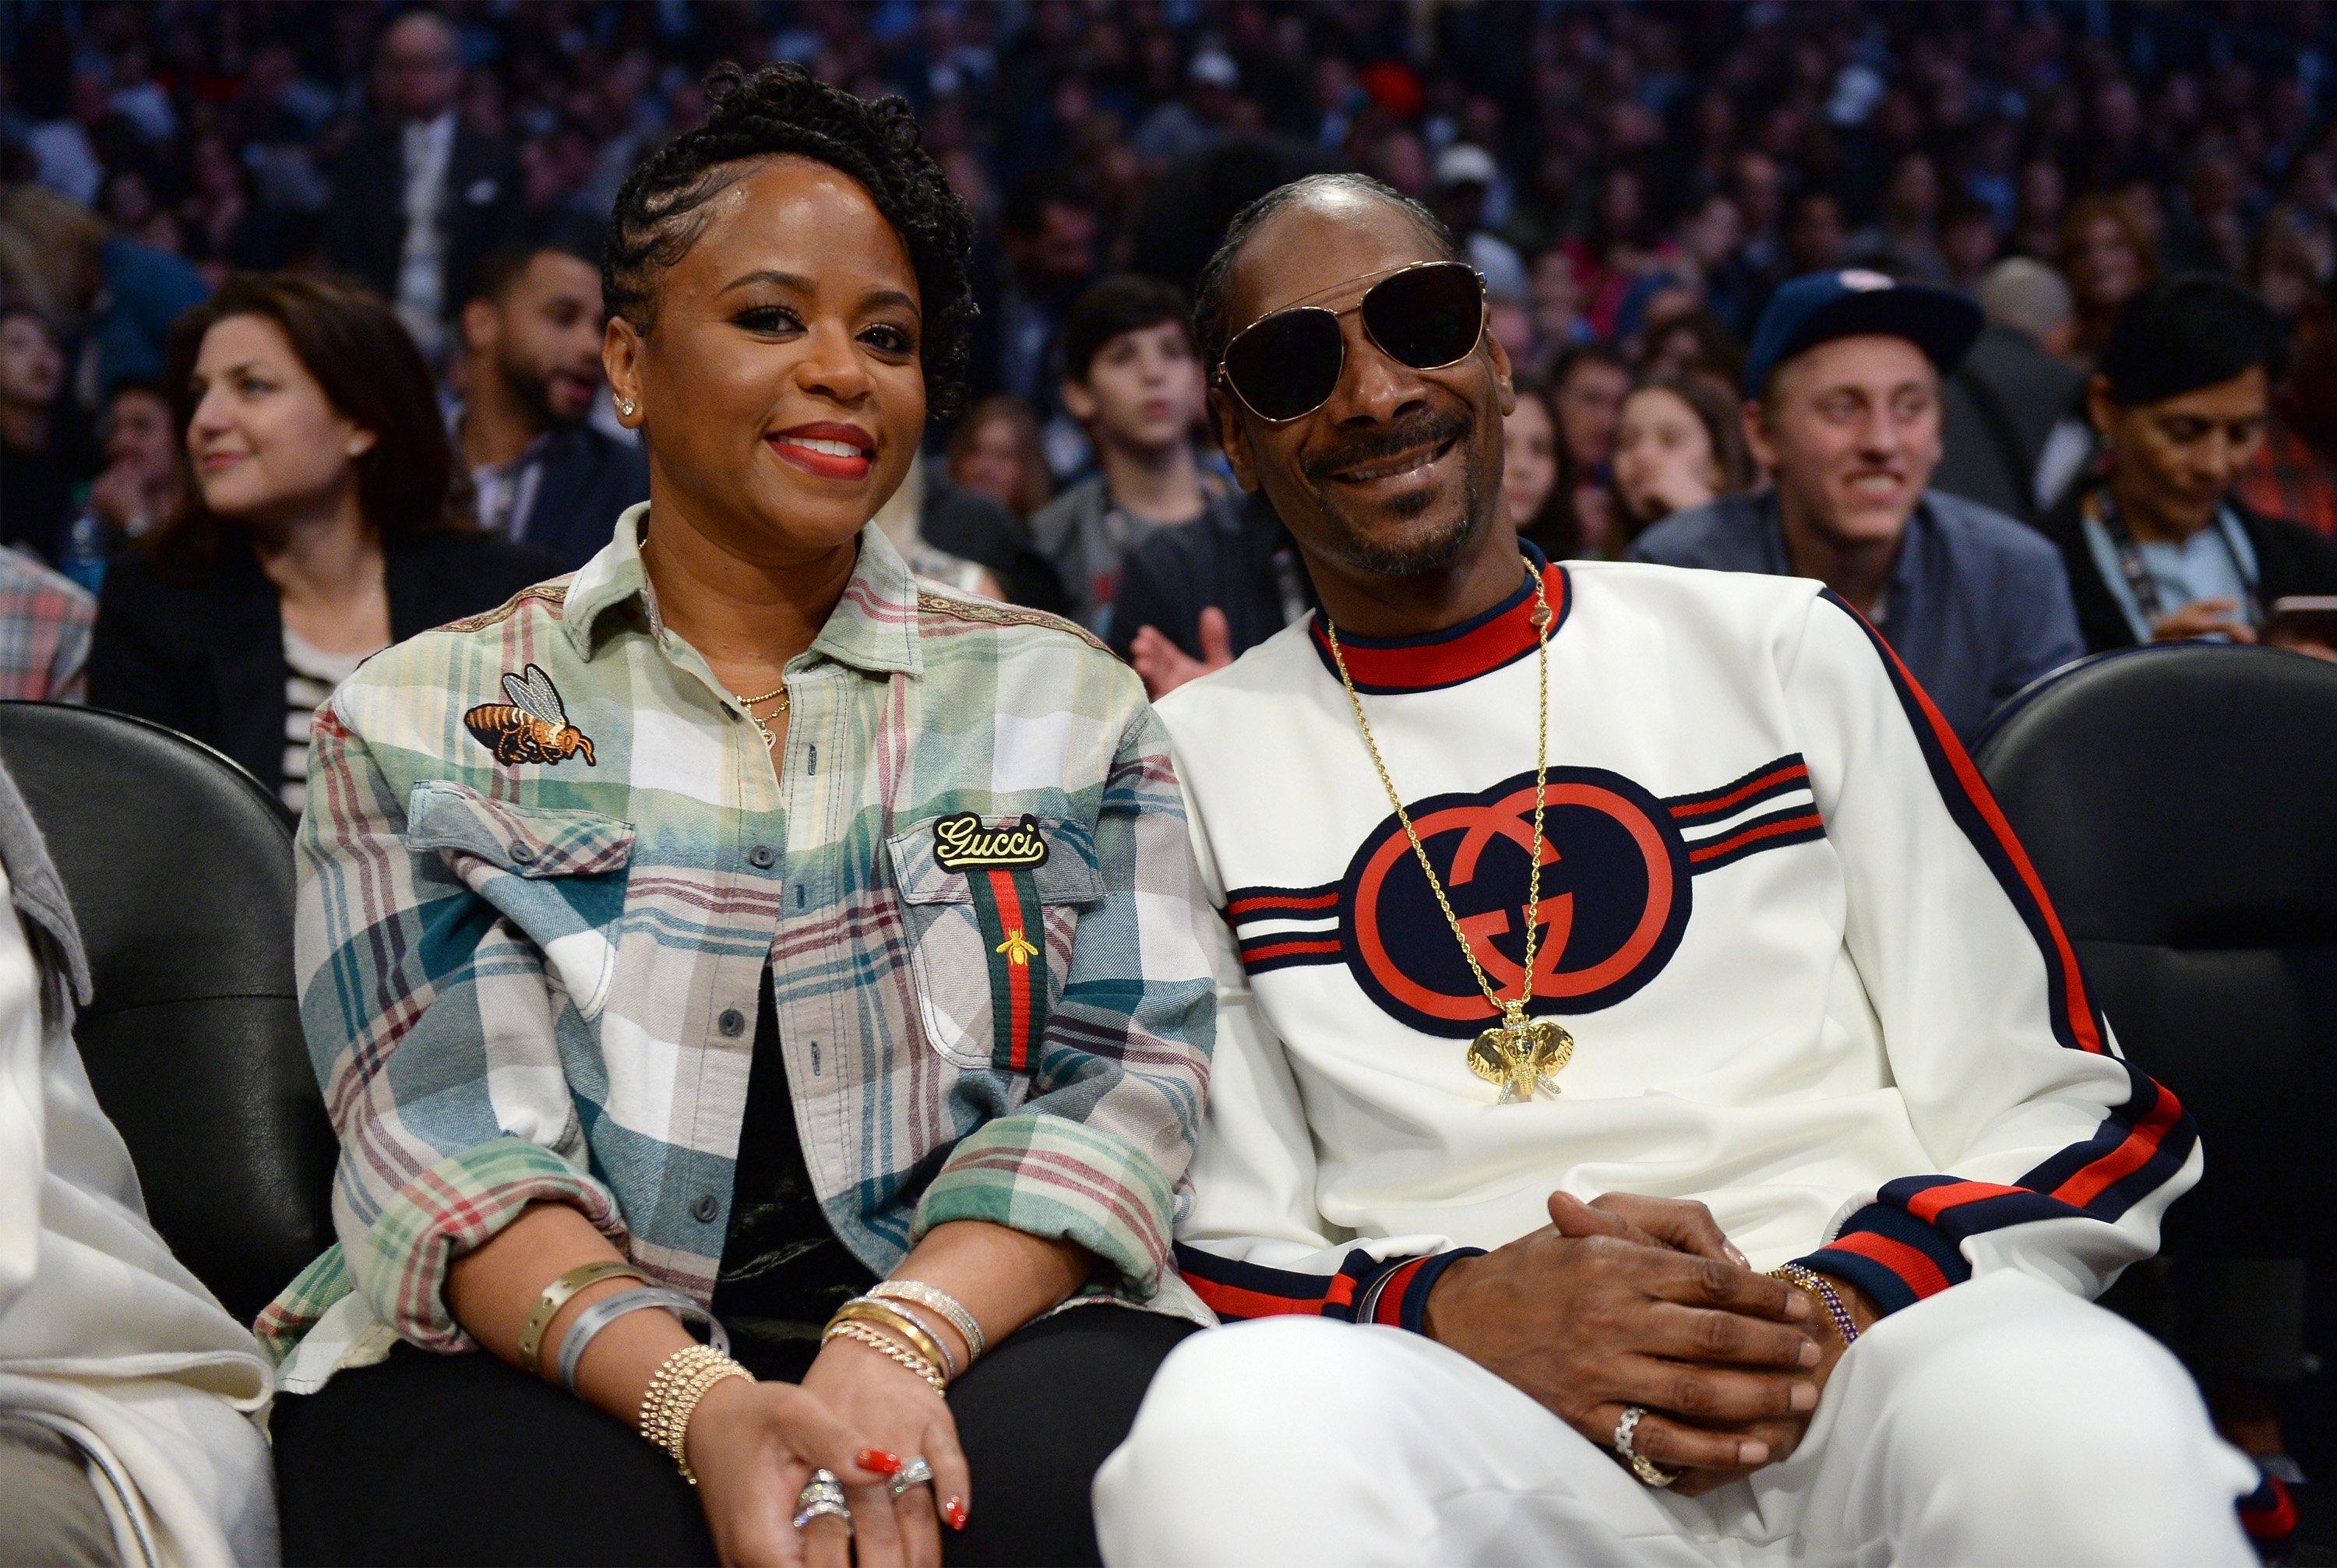 Snoop Dogg's Wife Shante Broadus Celebrates His 48th Birthday with